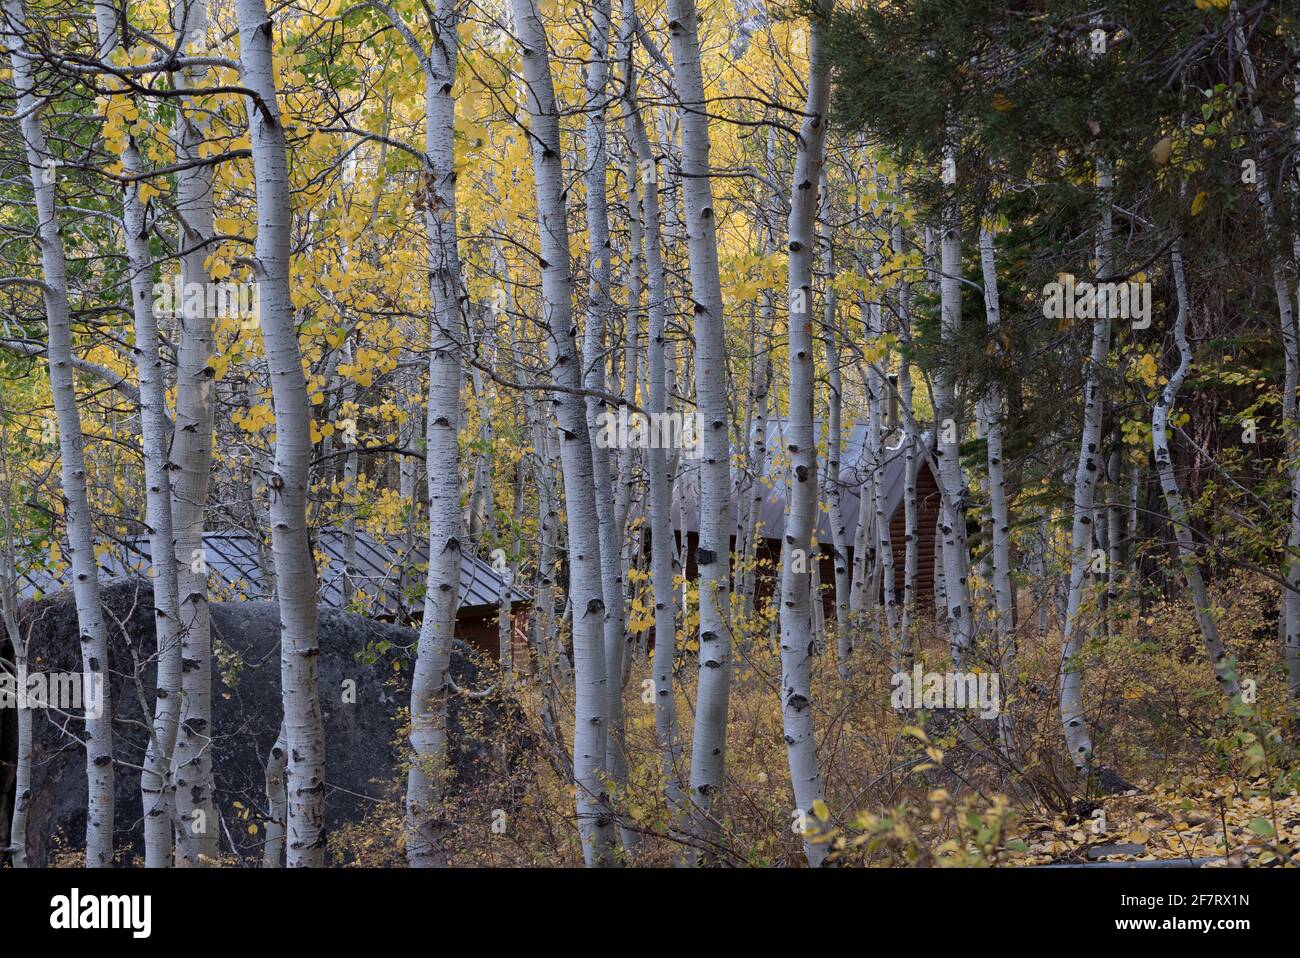 Cabin at the Wylder Hotel, former Sorensen's resort, nested among aspen trees in the Hope Valley near Markleeville, a famous tourist spot in the Fall, Stock Photo